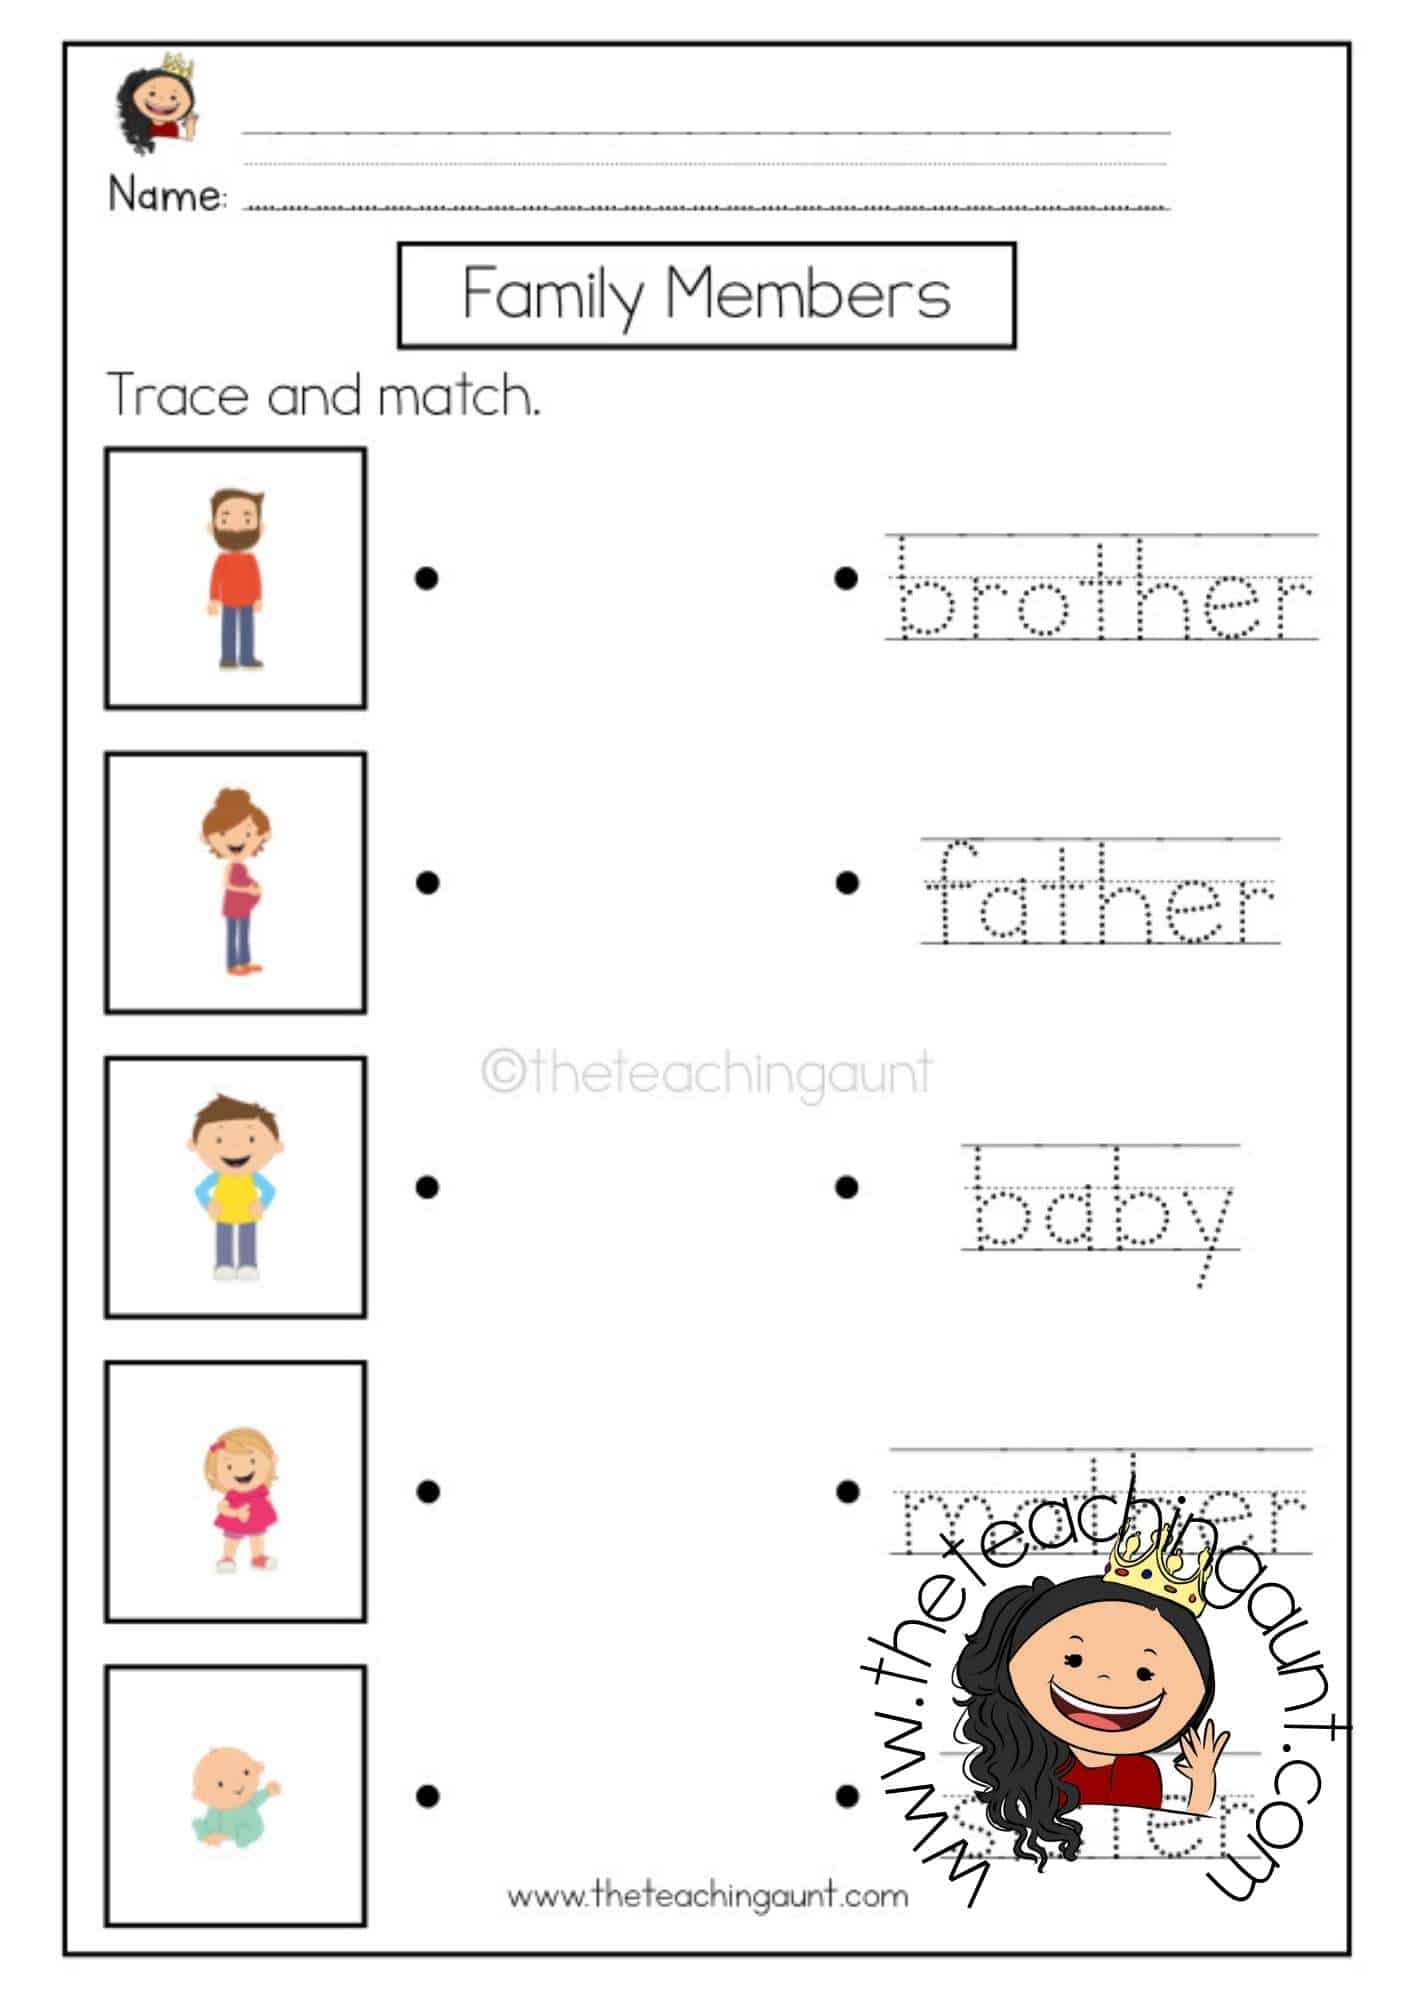 Free Family Members Matching Worksheet from The Teaching Aunt